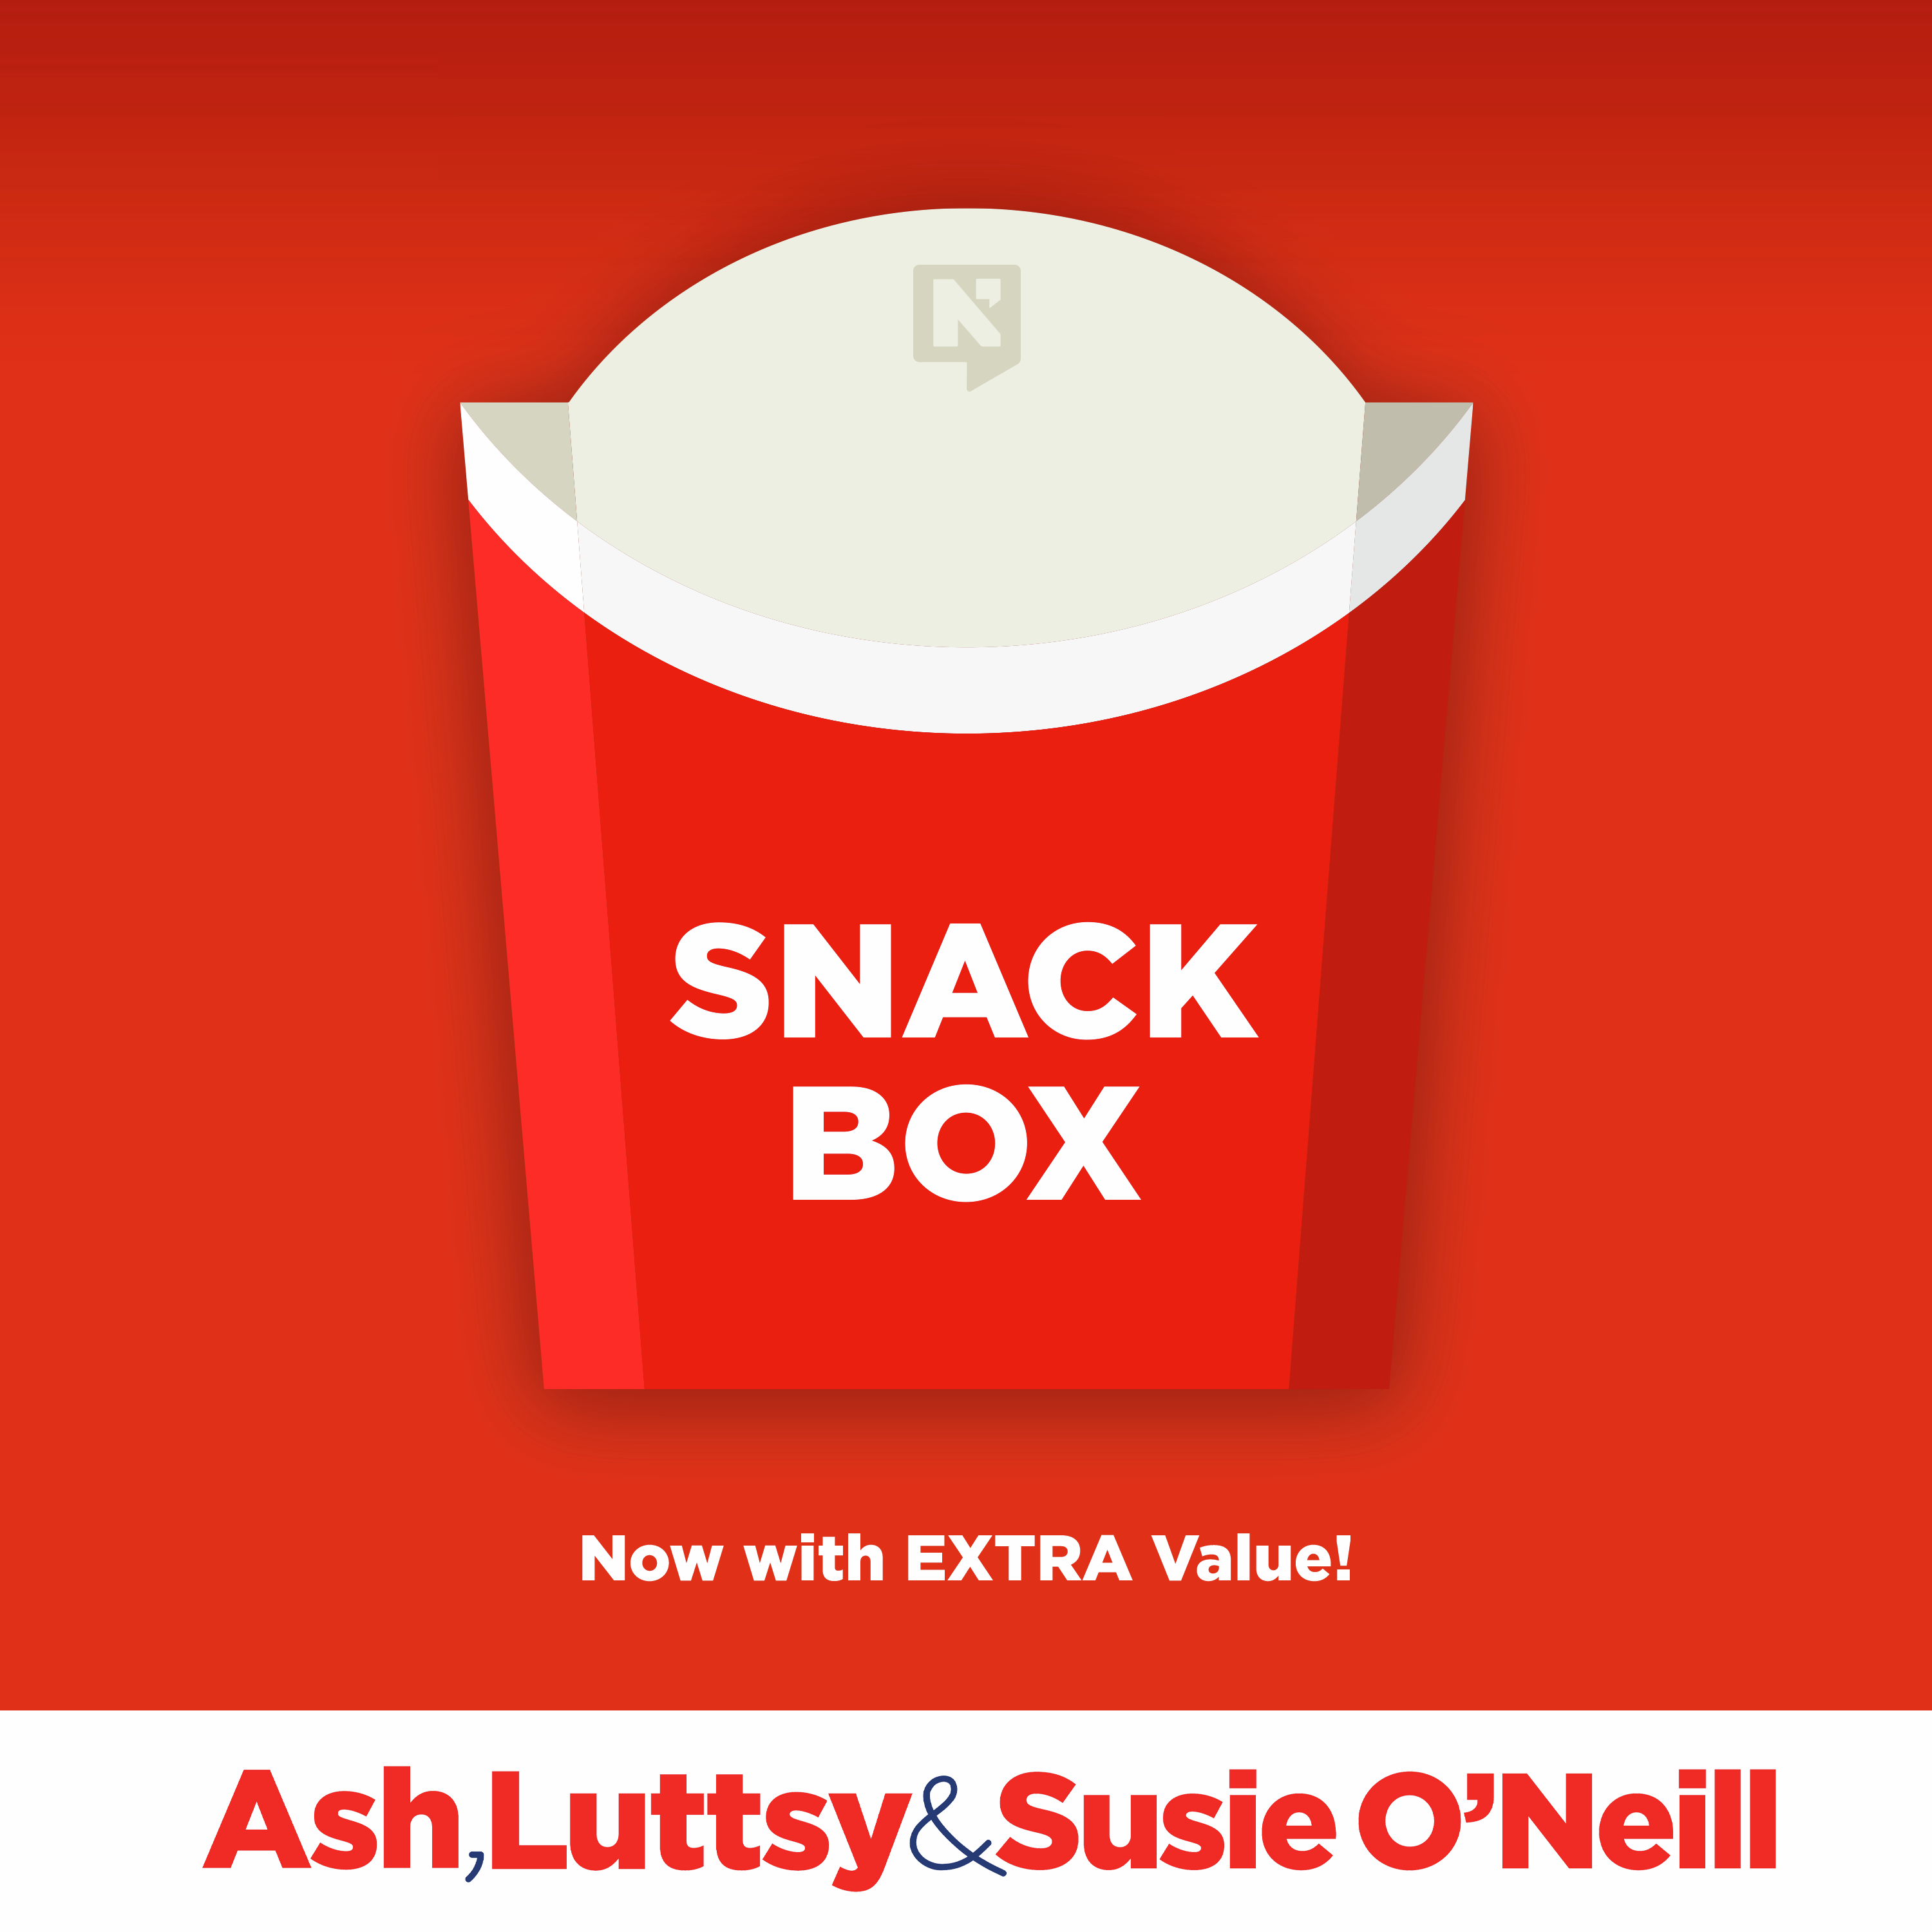 The Ash, Luttsy and Susie Snackbox | Monday 9th July